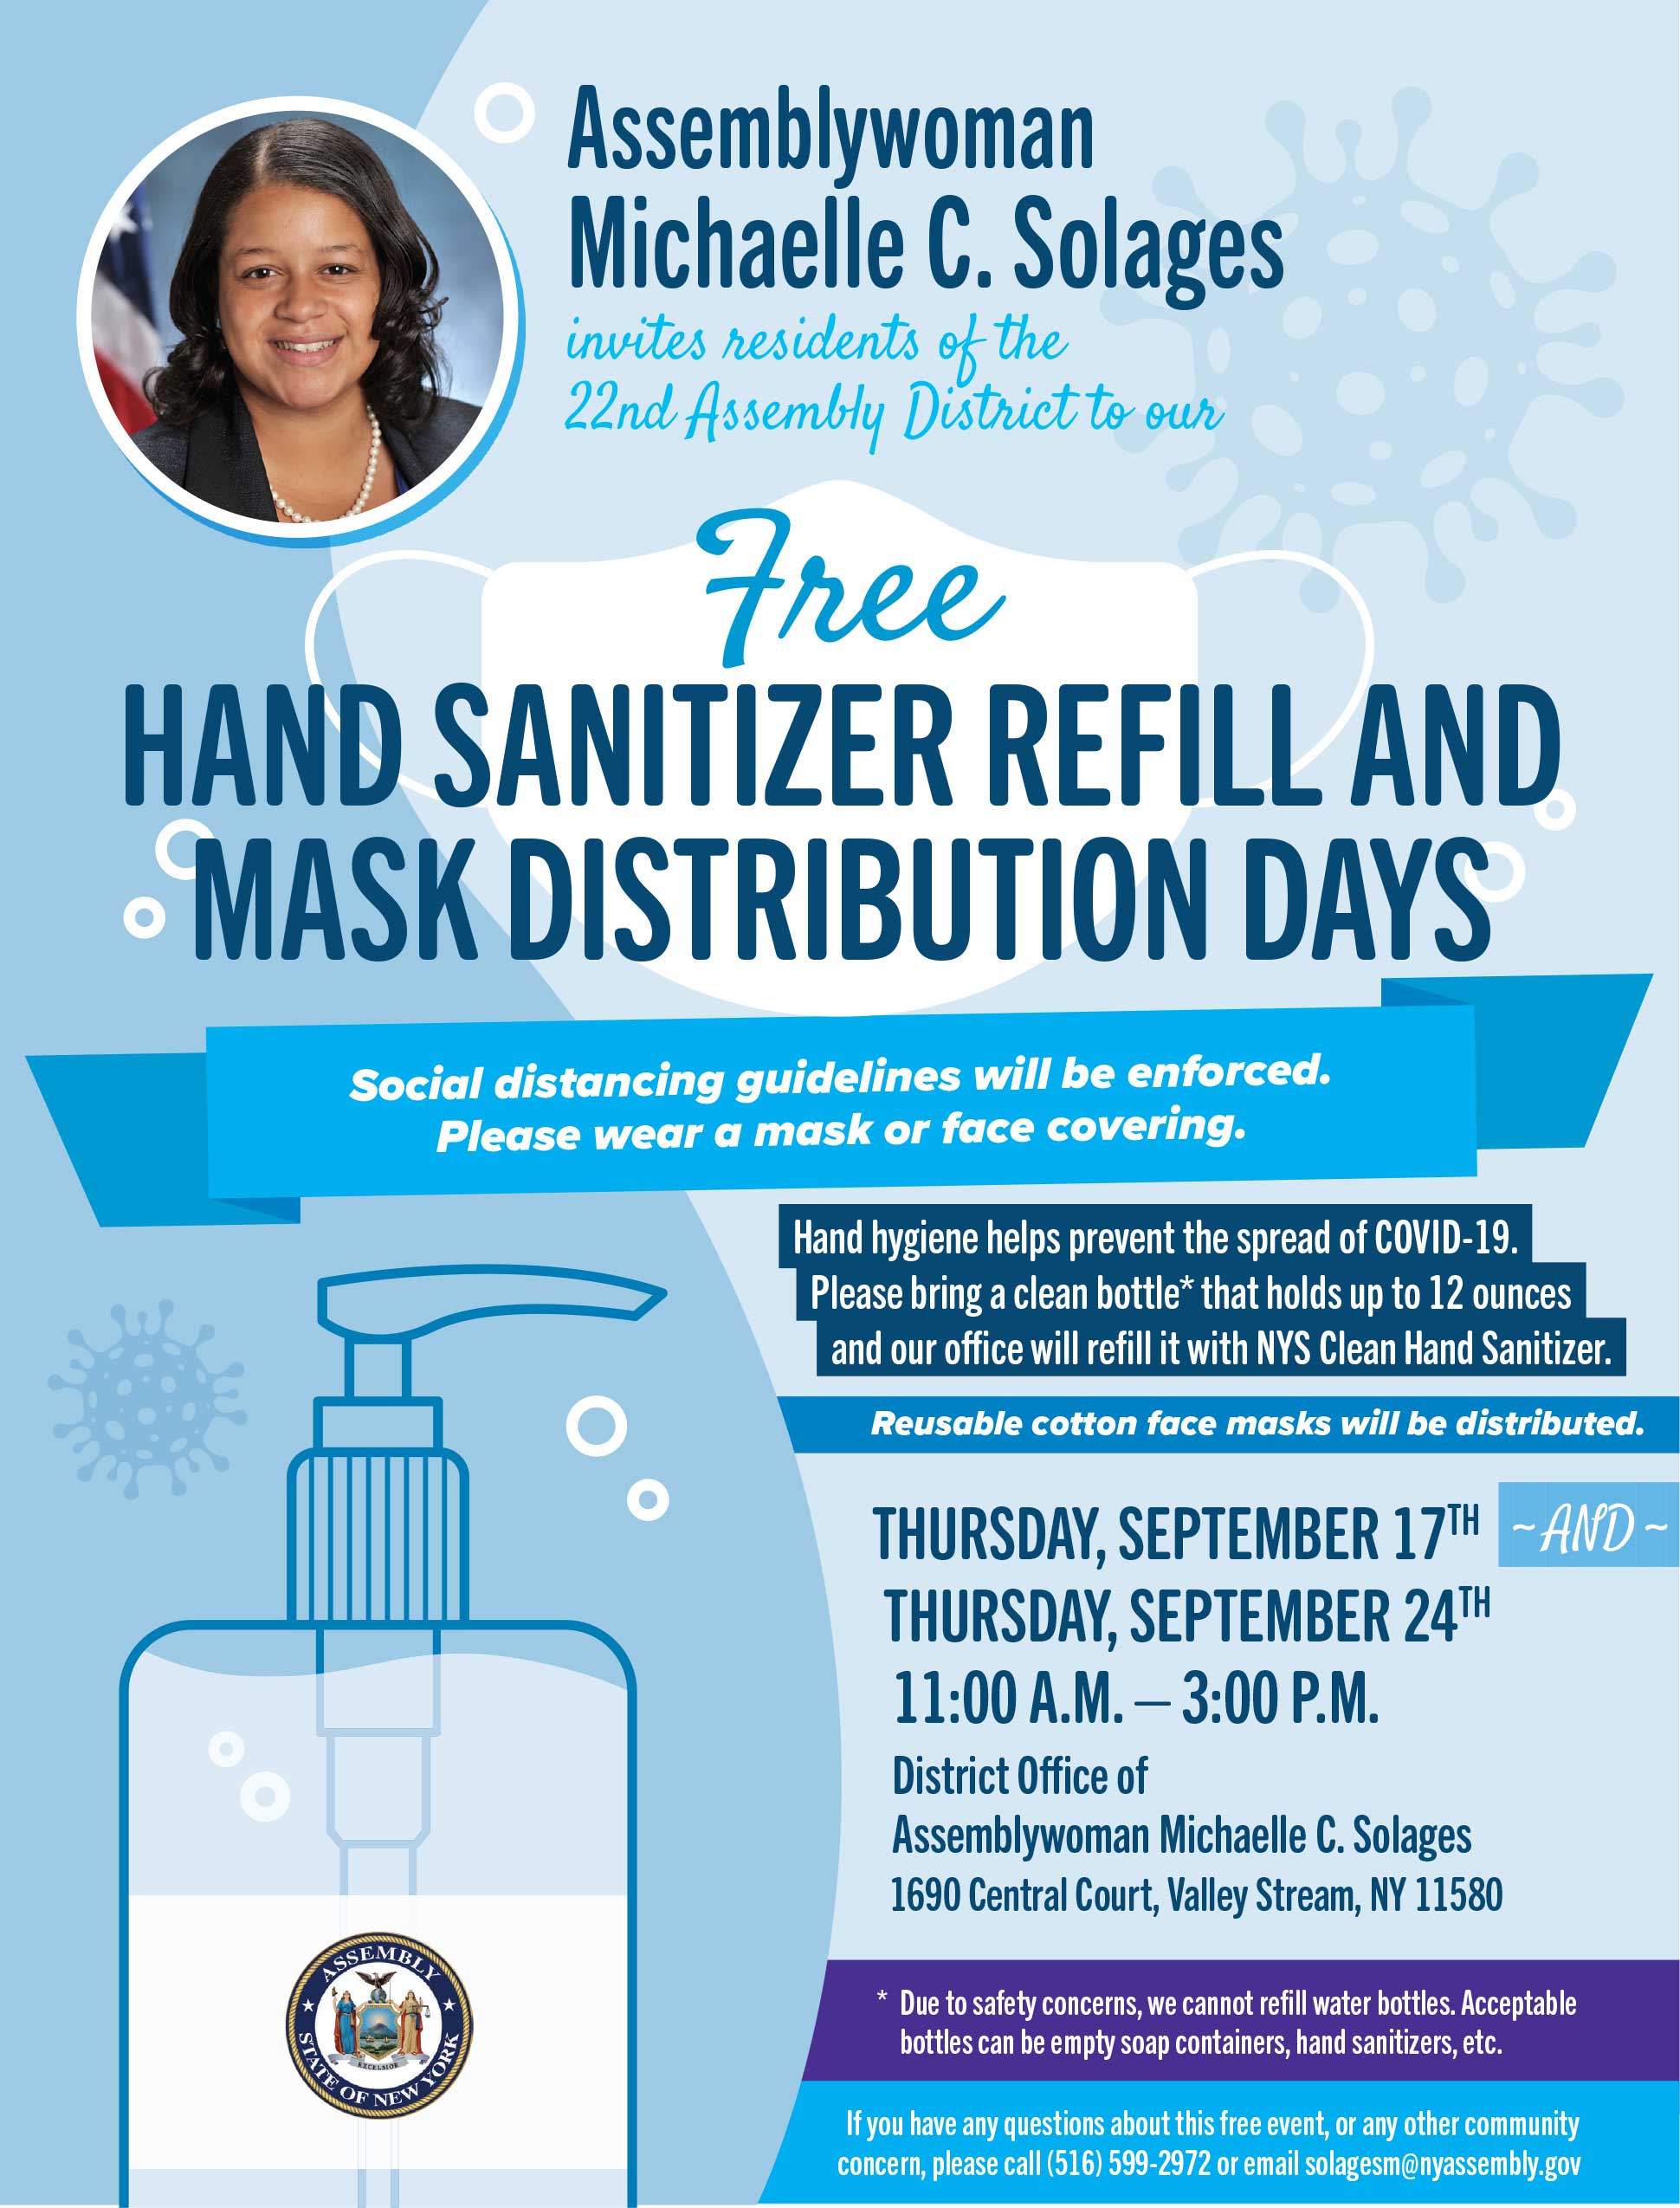 Hand Sanitizer Refill And Mask Distribution Days